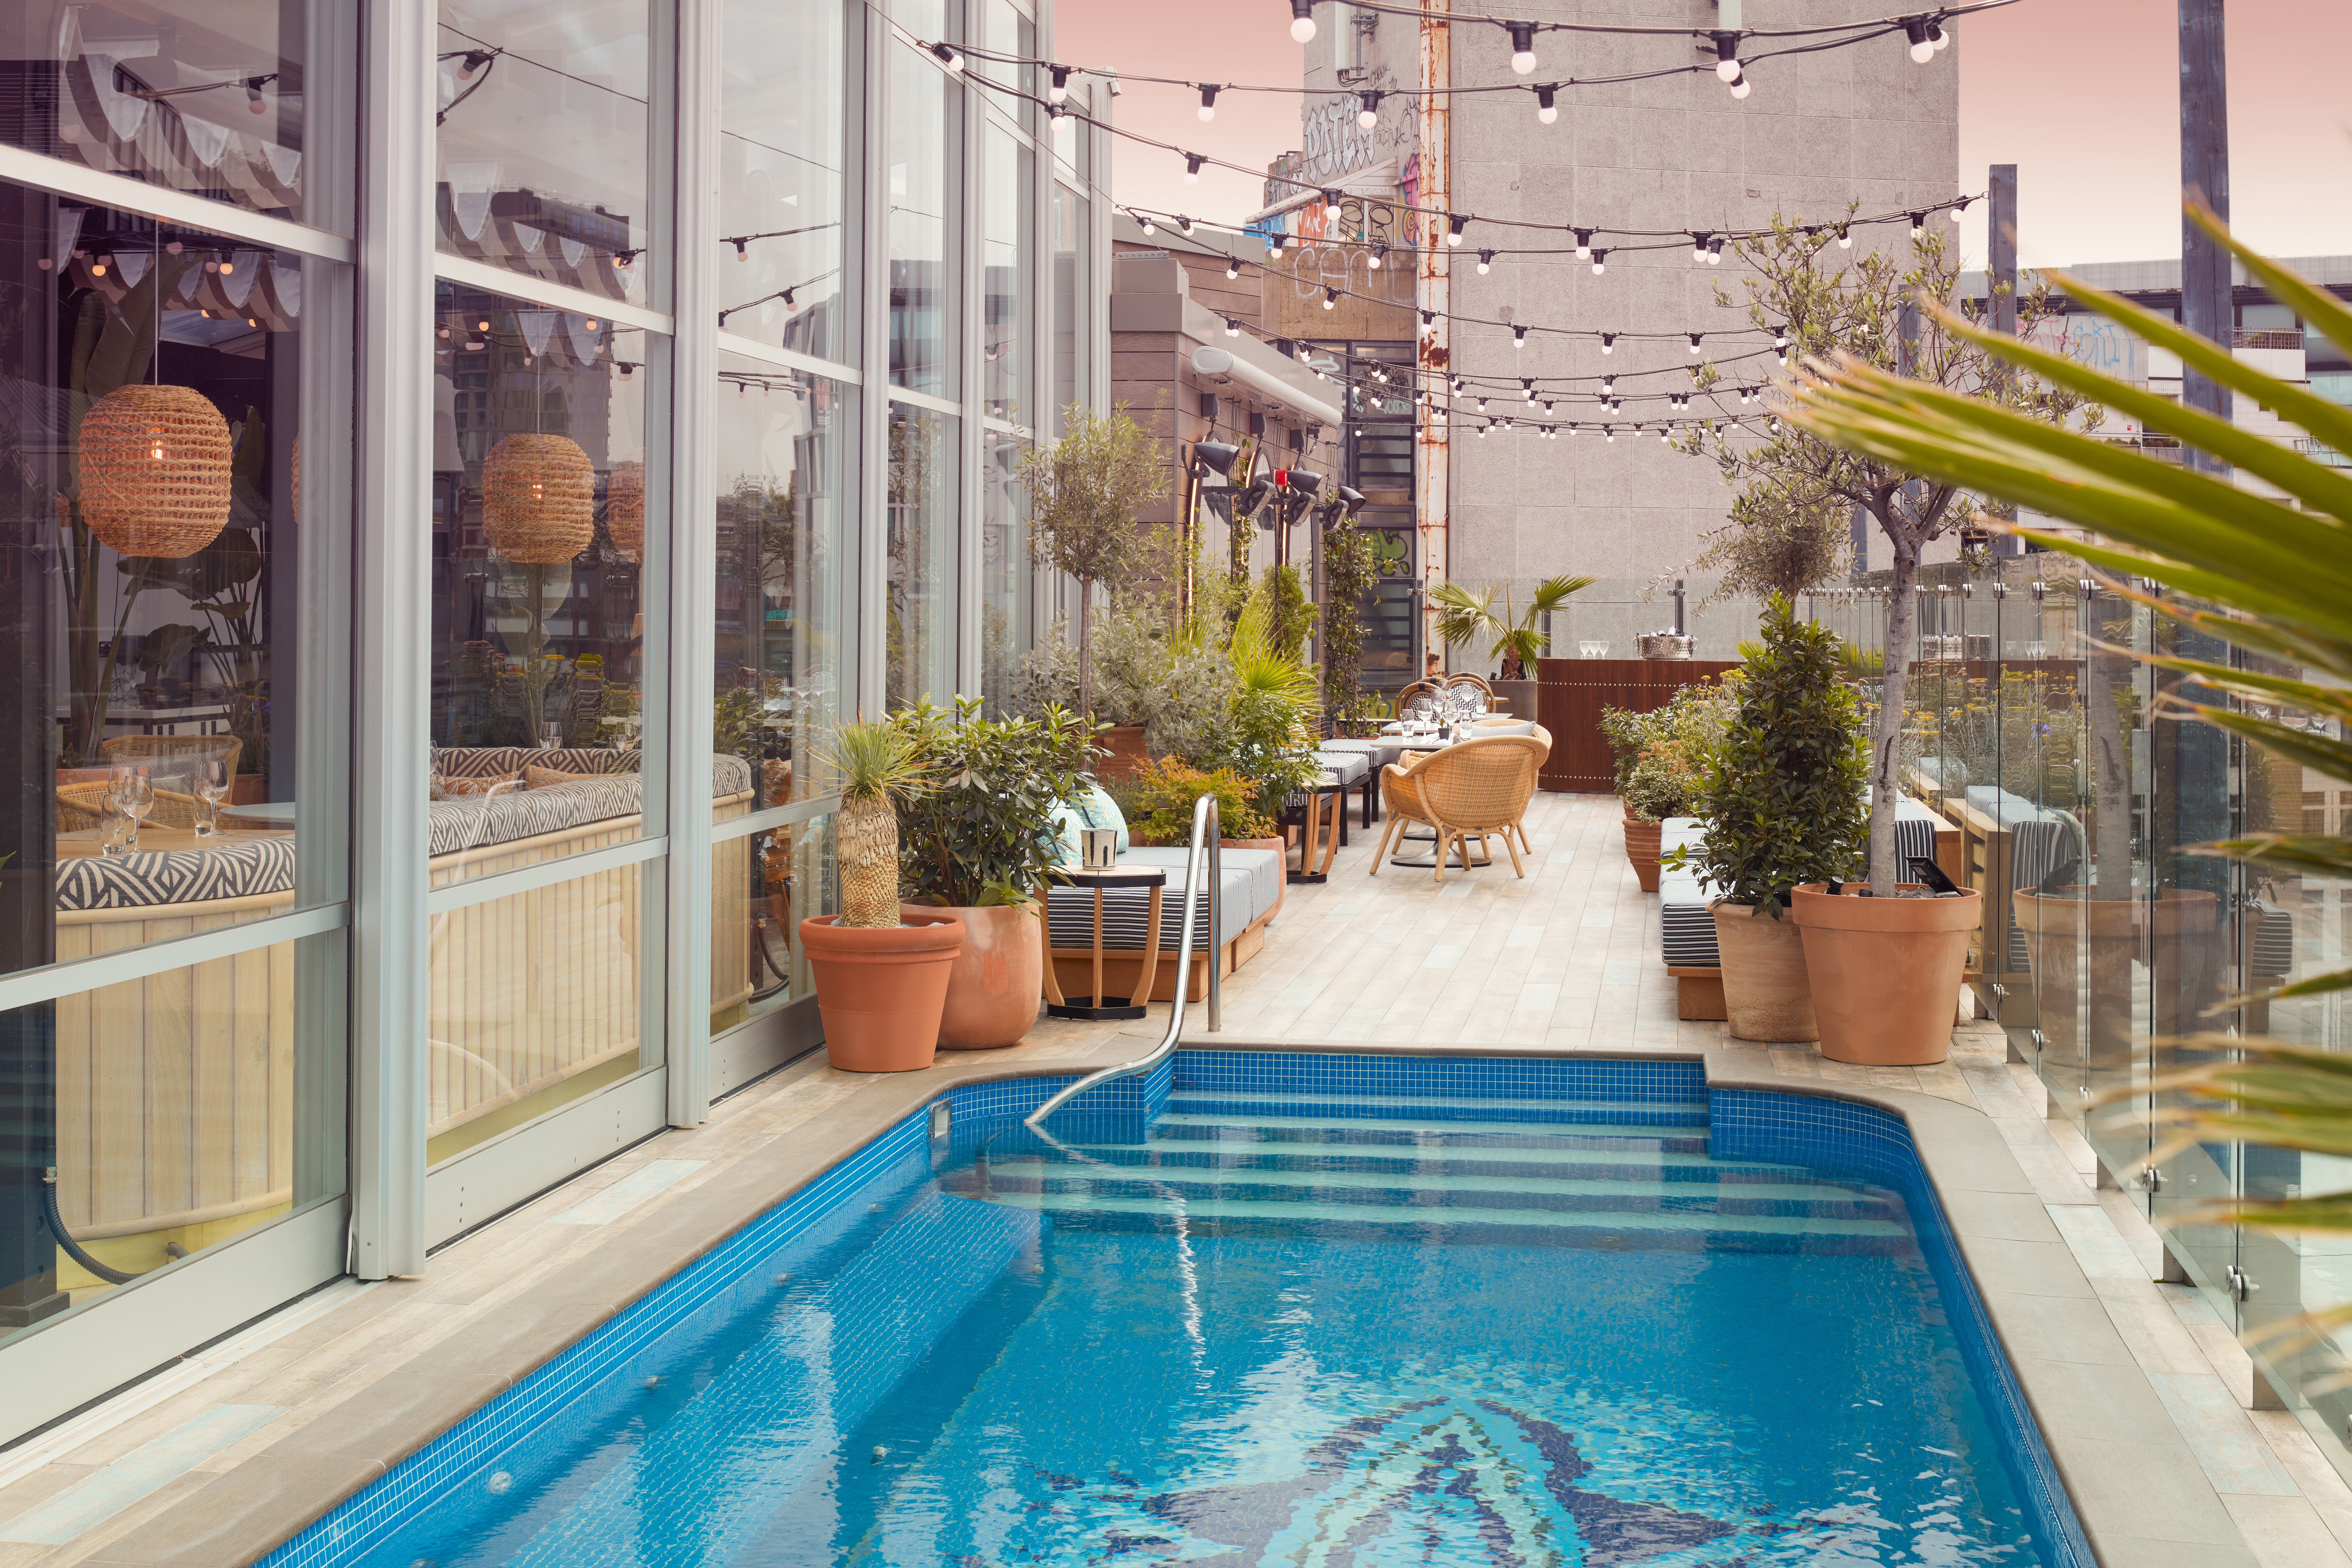 The Mondrian Shoreditch’s rooftop Lido restaurant is the best place to while away a sunny day